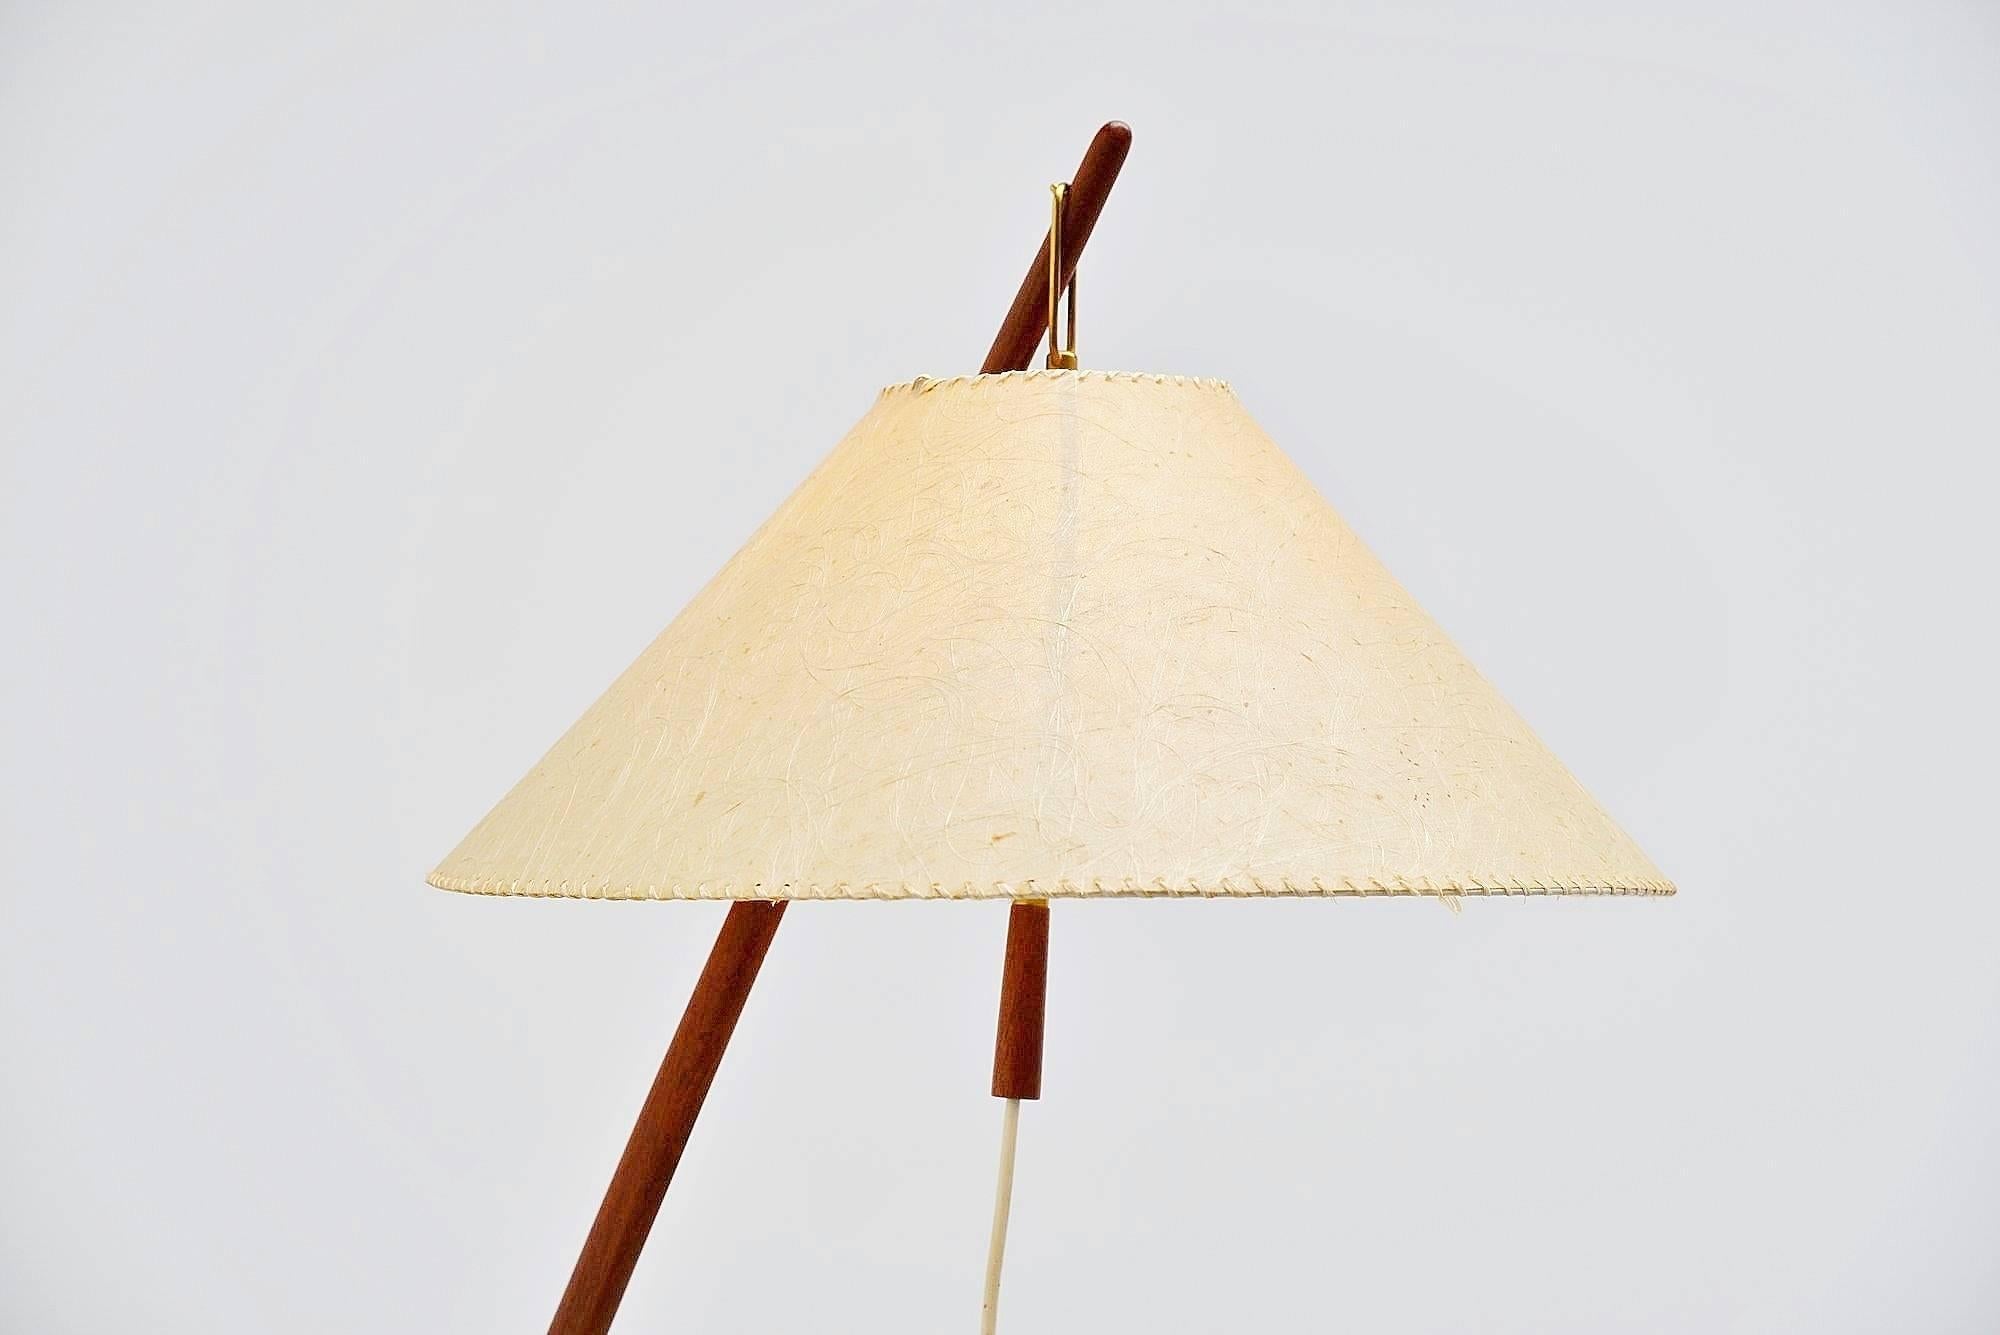 Very nice and rare floor lamp designed by J.T. Kalmar, manufactured by Kalmar Werkstatten, 1947. This is a very nice and early example as some of the Kalmar lamps are back into production. The shades height can be changed using the brass hooks at